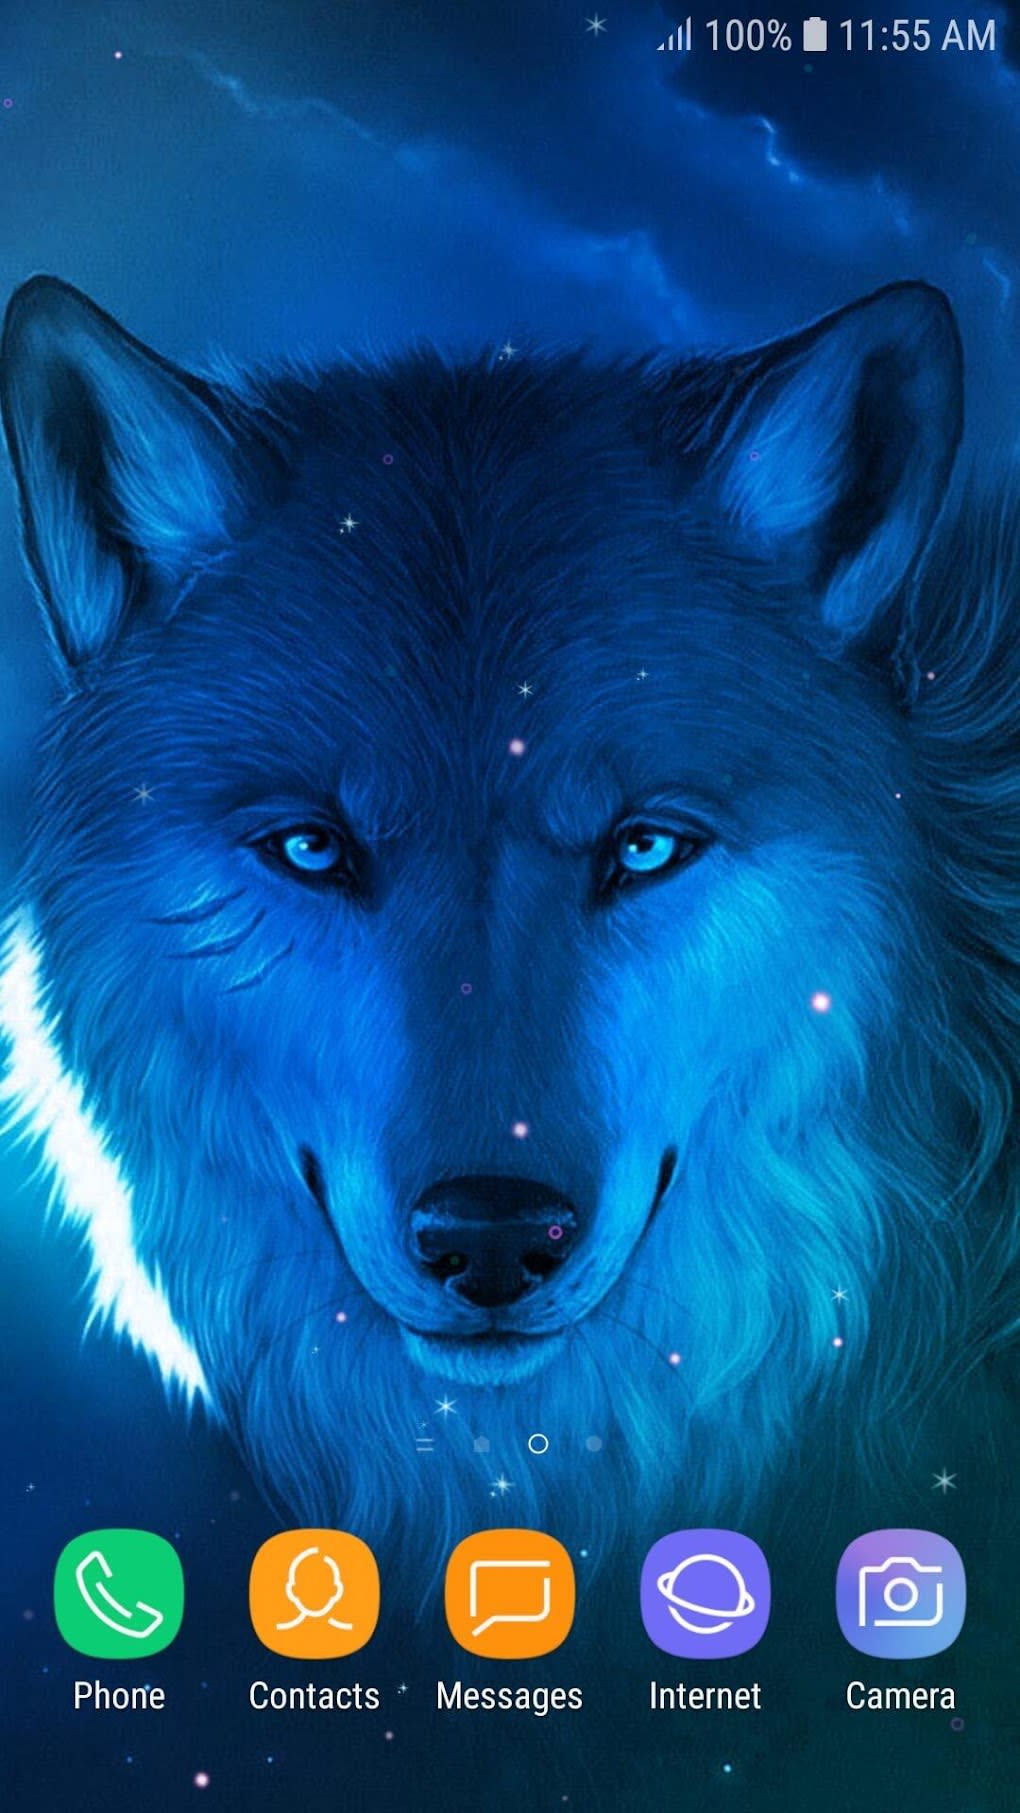 Wolf Pack Images  Free Photos, PNG Stickers, Wallpapers